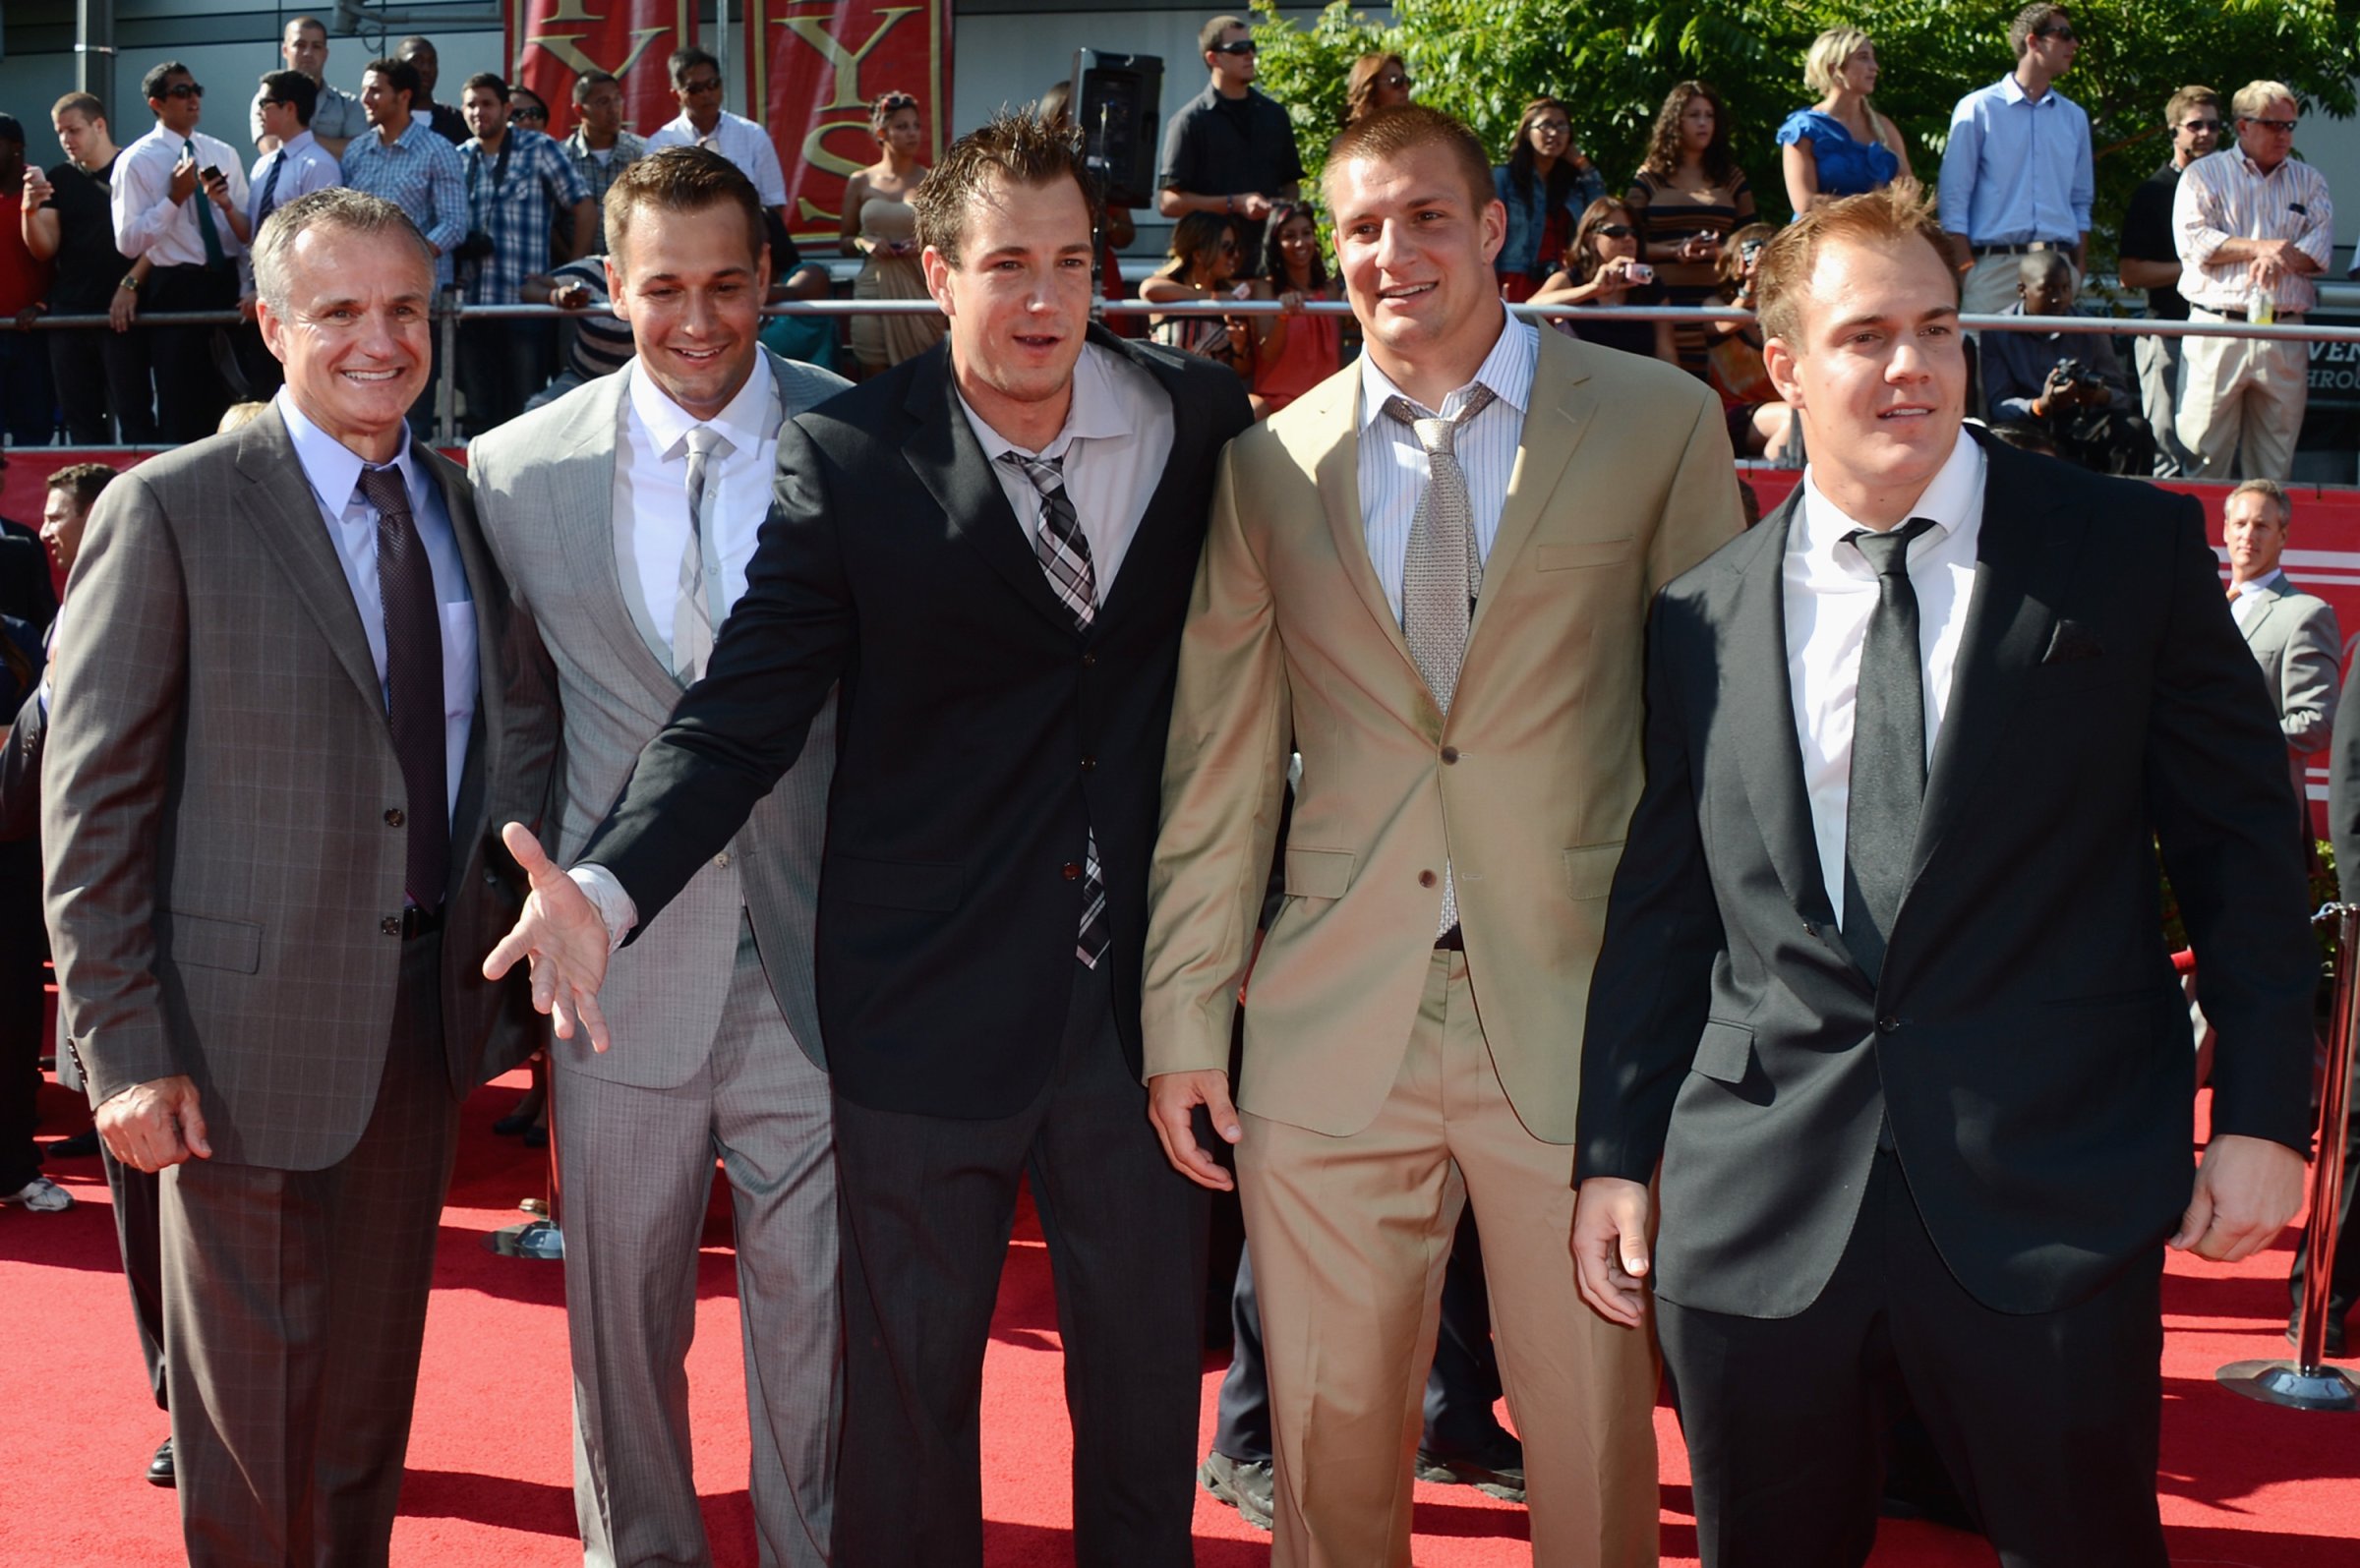 (L-R)Father Gord Gronkowski, Brothers Dan Gronkowski, Gordie Gronkowski, Rob Gronkowski and Glenn Gronkowski arrive at the 2012 ESPY Awards at Nokia Theatre L.A. Live on July 11, 2012 in Los Angeles.